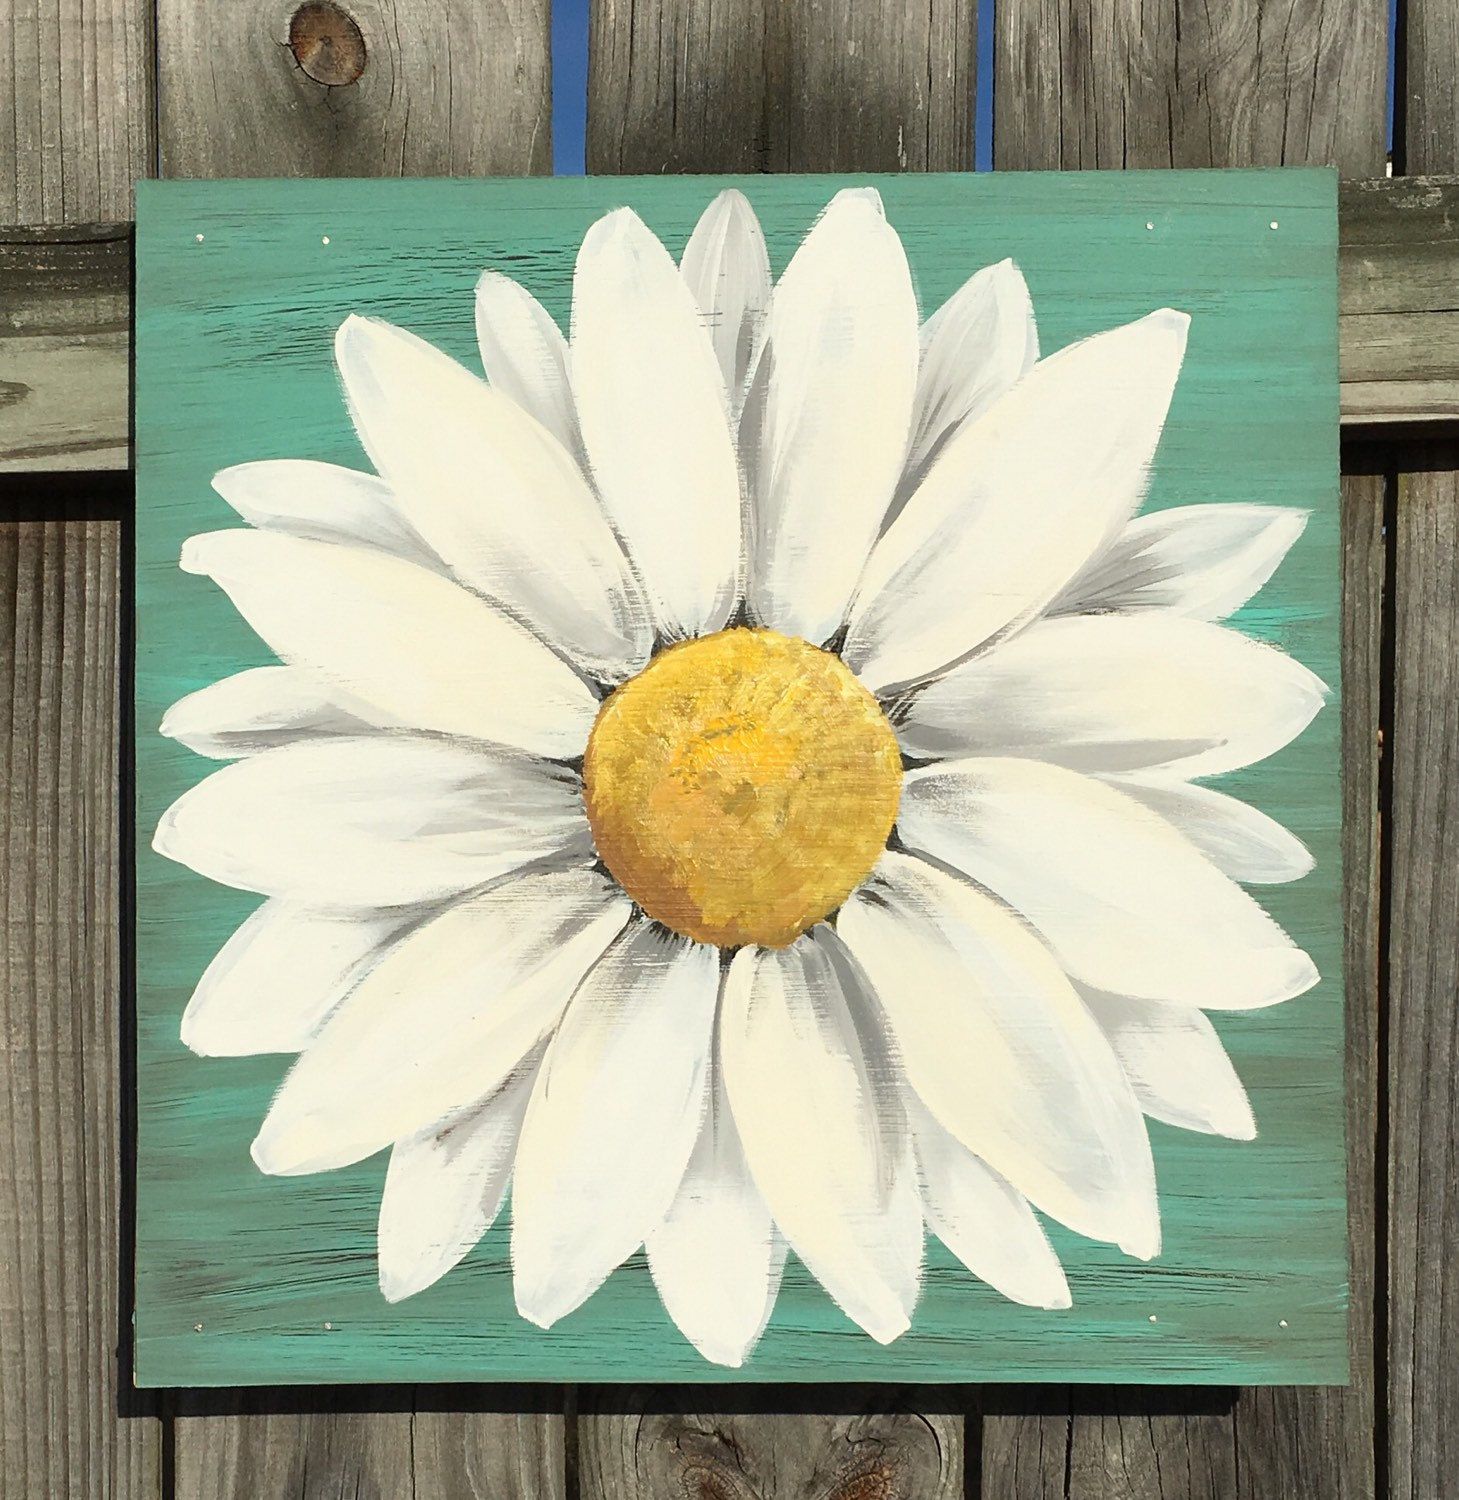 Daisy Painting on a Wood Panel Original Flower Art Turquoise Blue ...